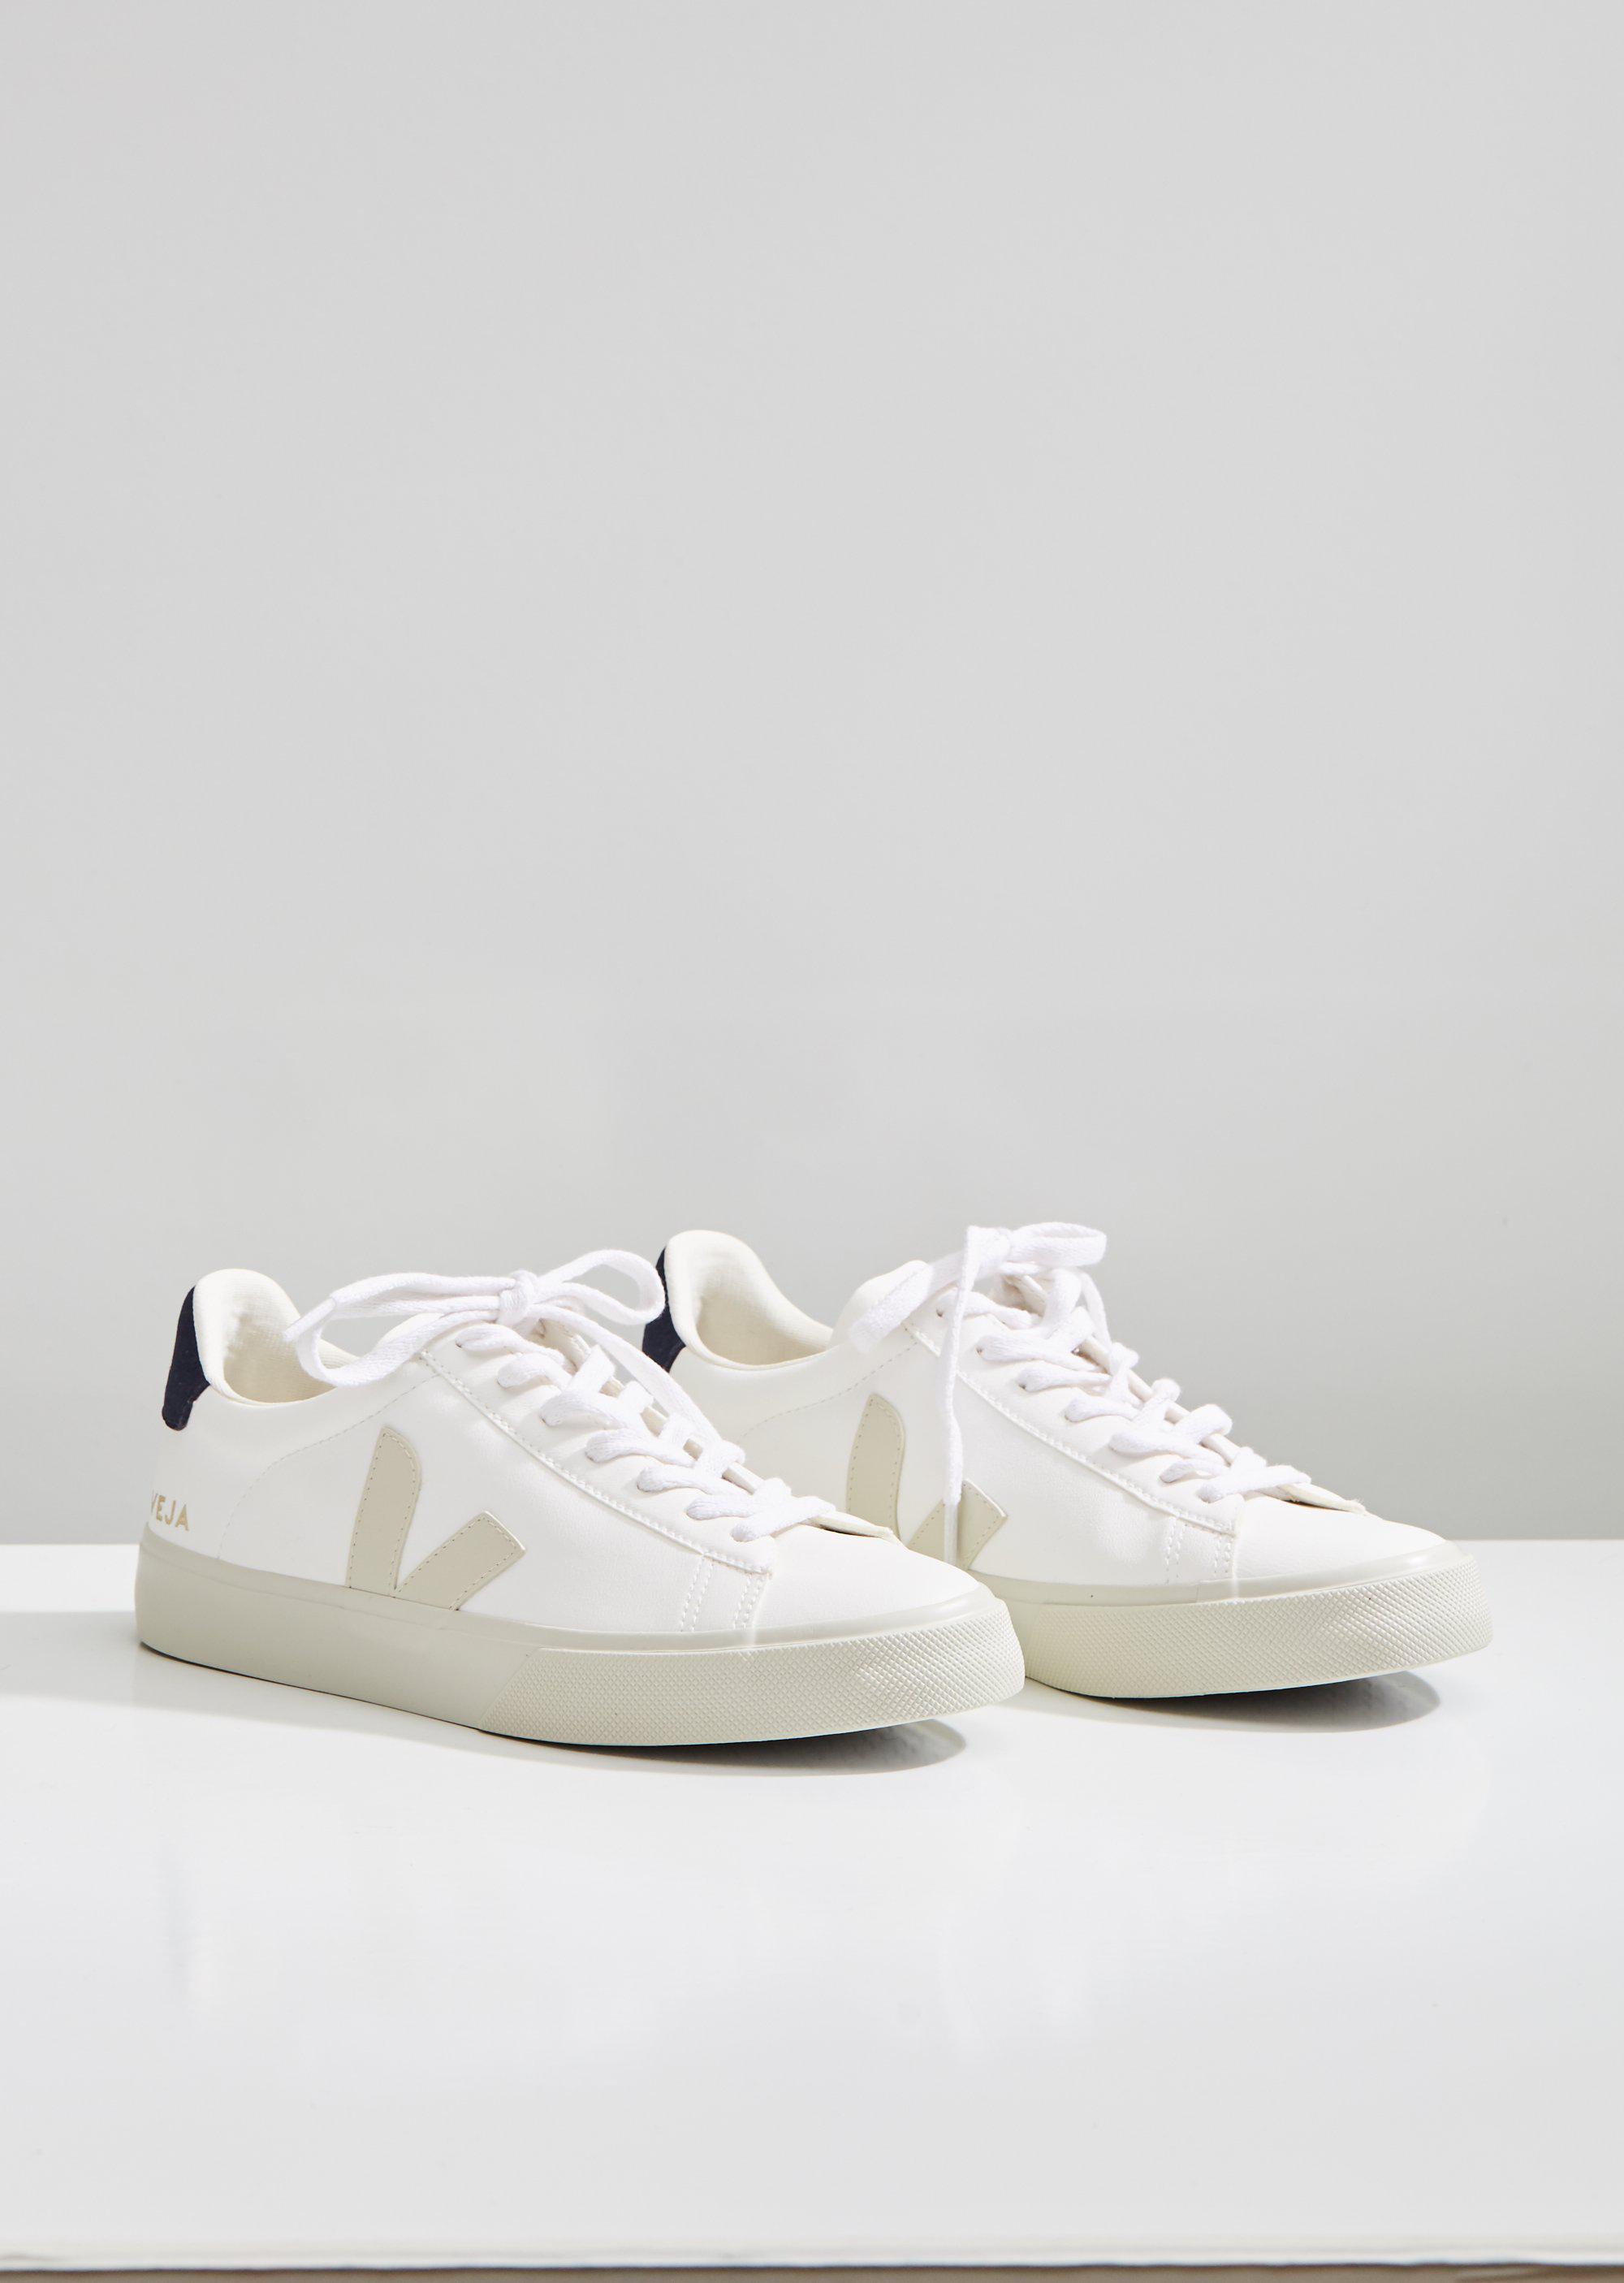 Veja Campo Sneakers in White - Lyst